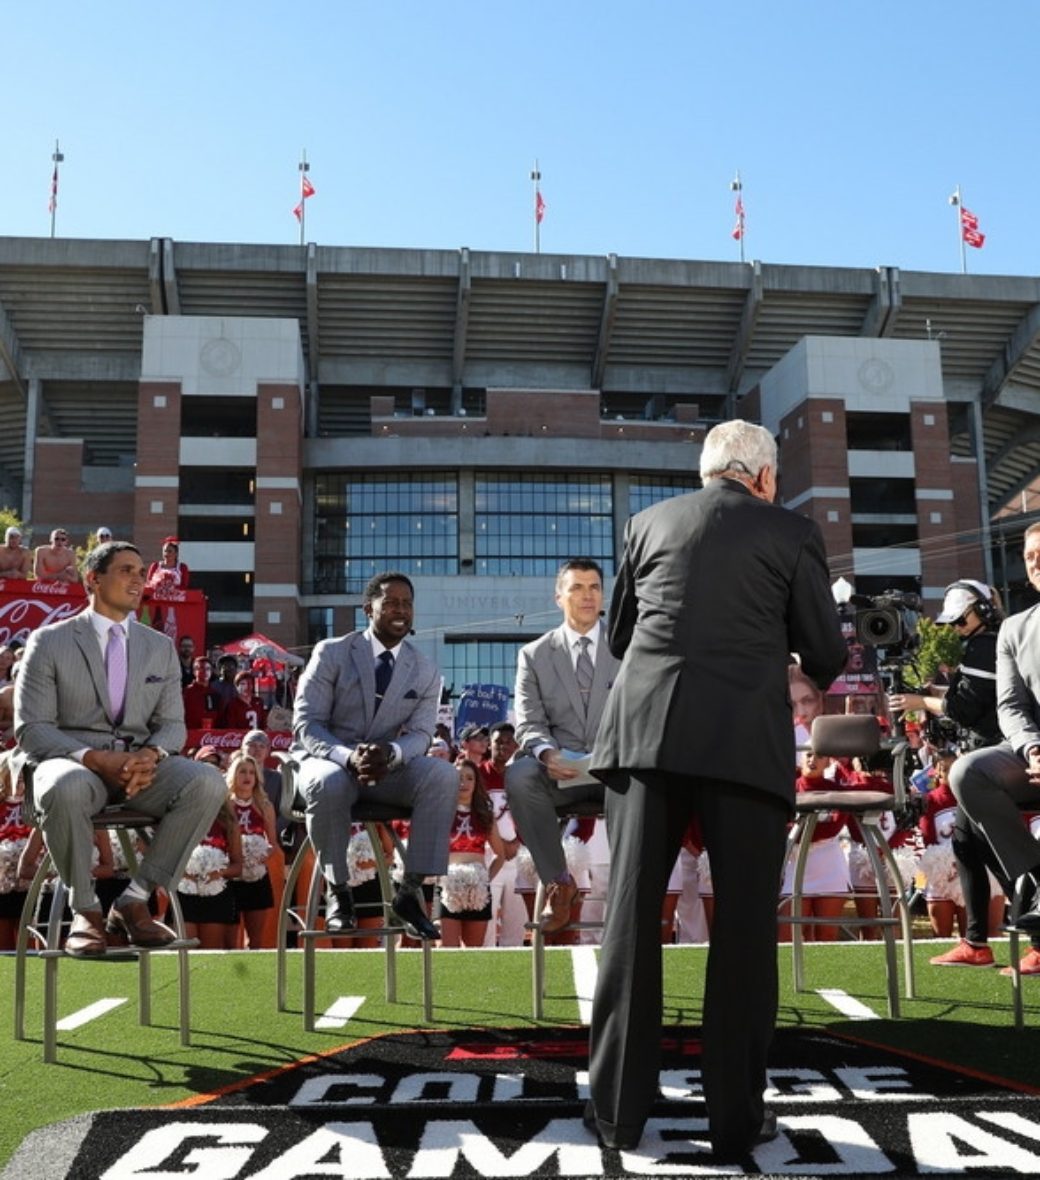 At Alabama, Corso gives a cherished locker room speech to (seated, L-R) Pollack, Howard, Davis, and Herbstreit. (Allen Kee/ESPN Images)